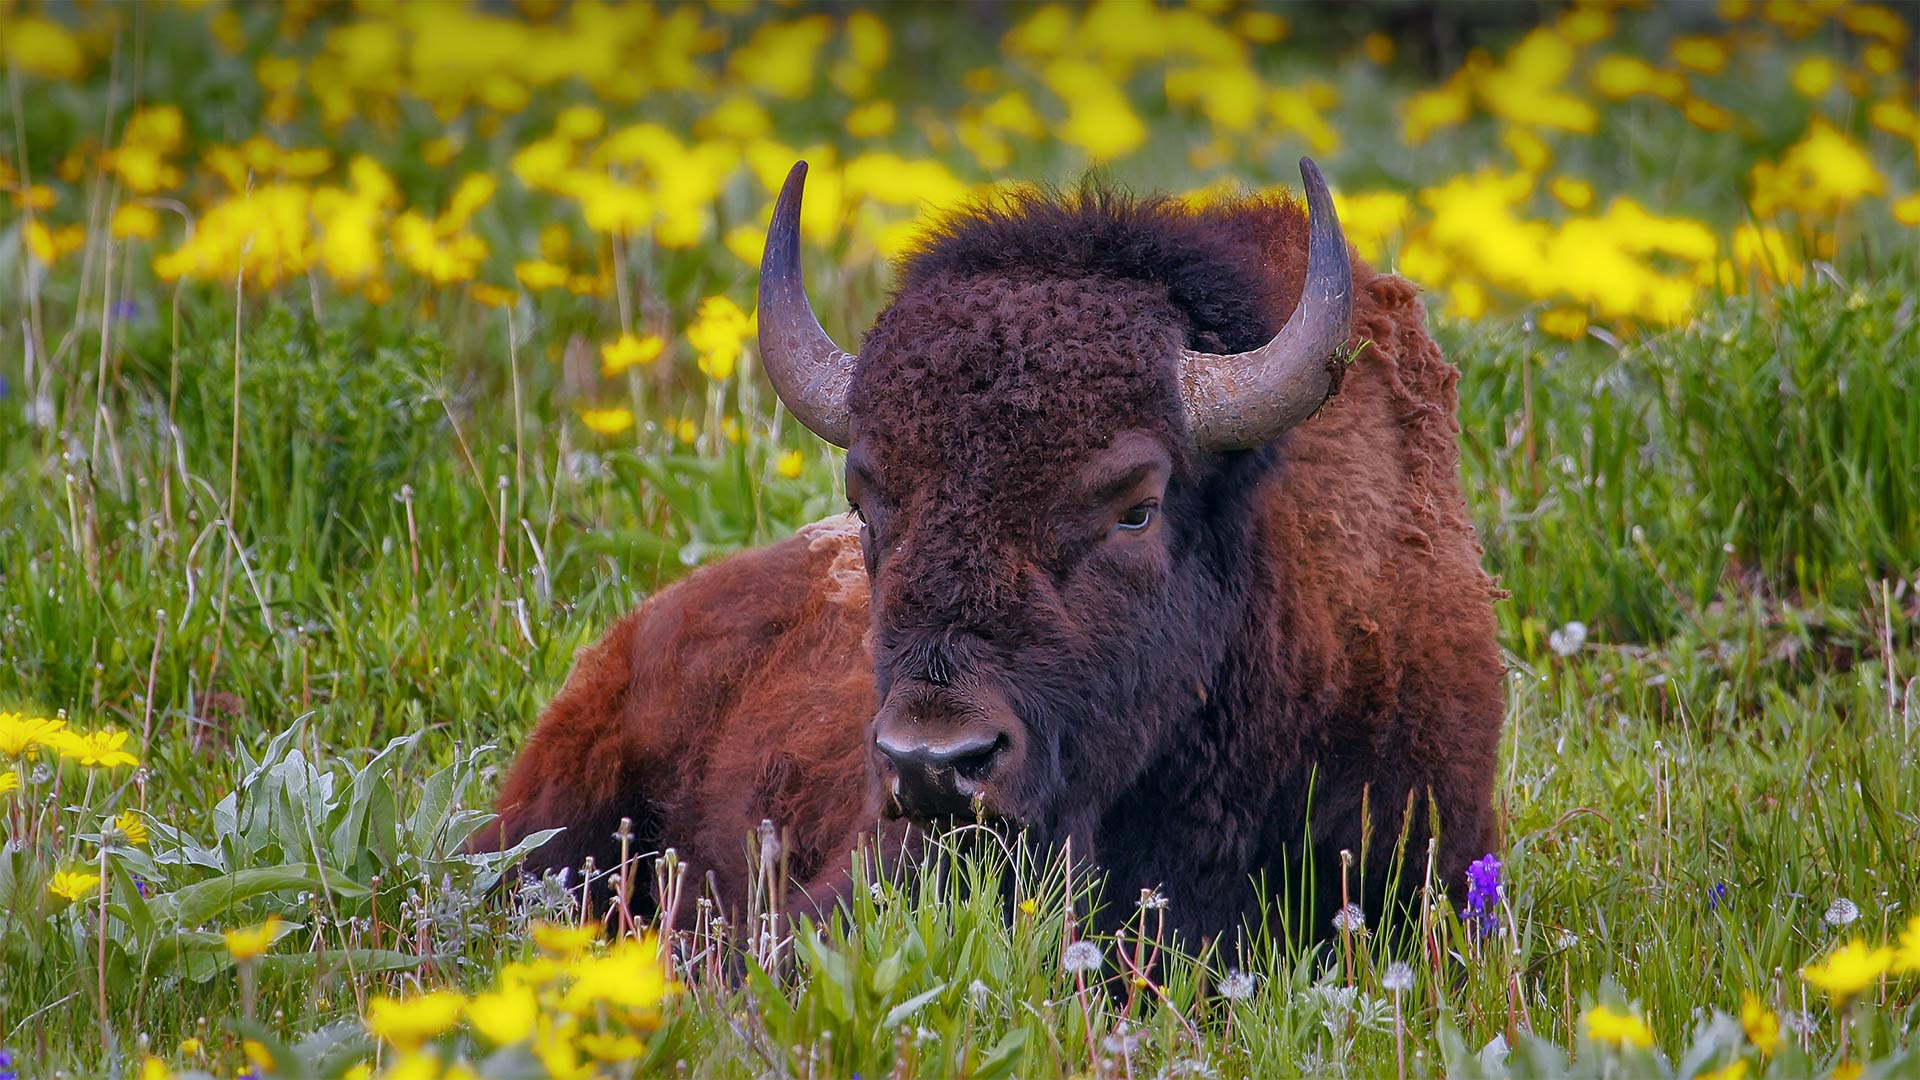 Male American bison in Yellowstone National Park, Wyoming - Donyanedomam/Getty Images)